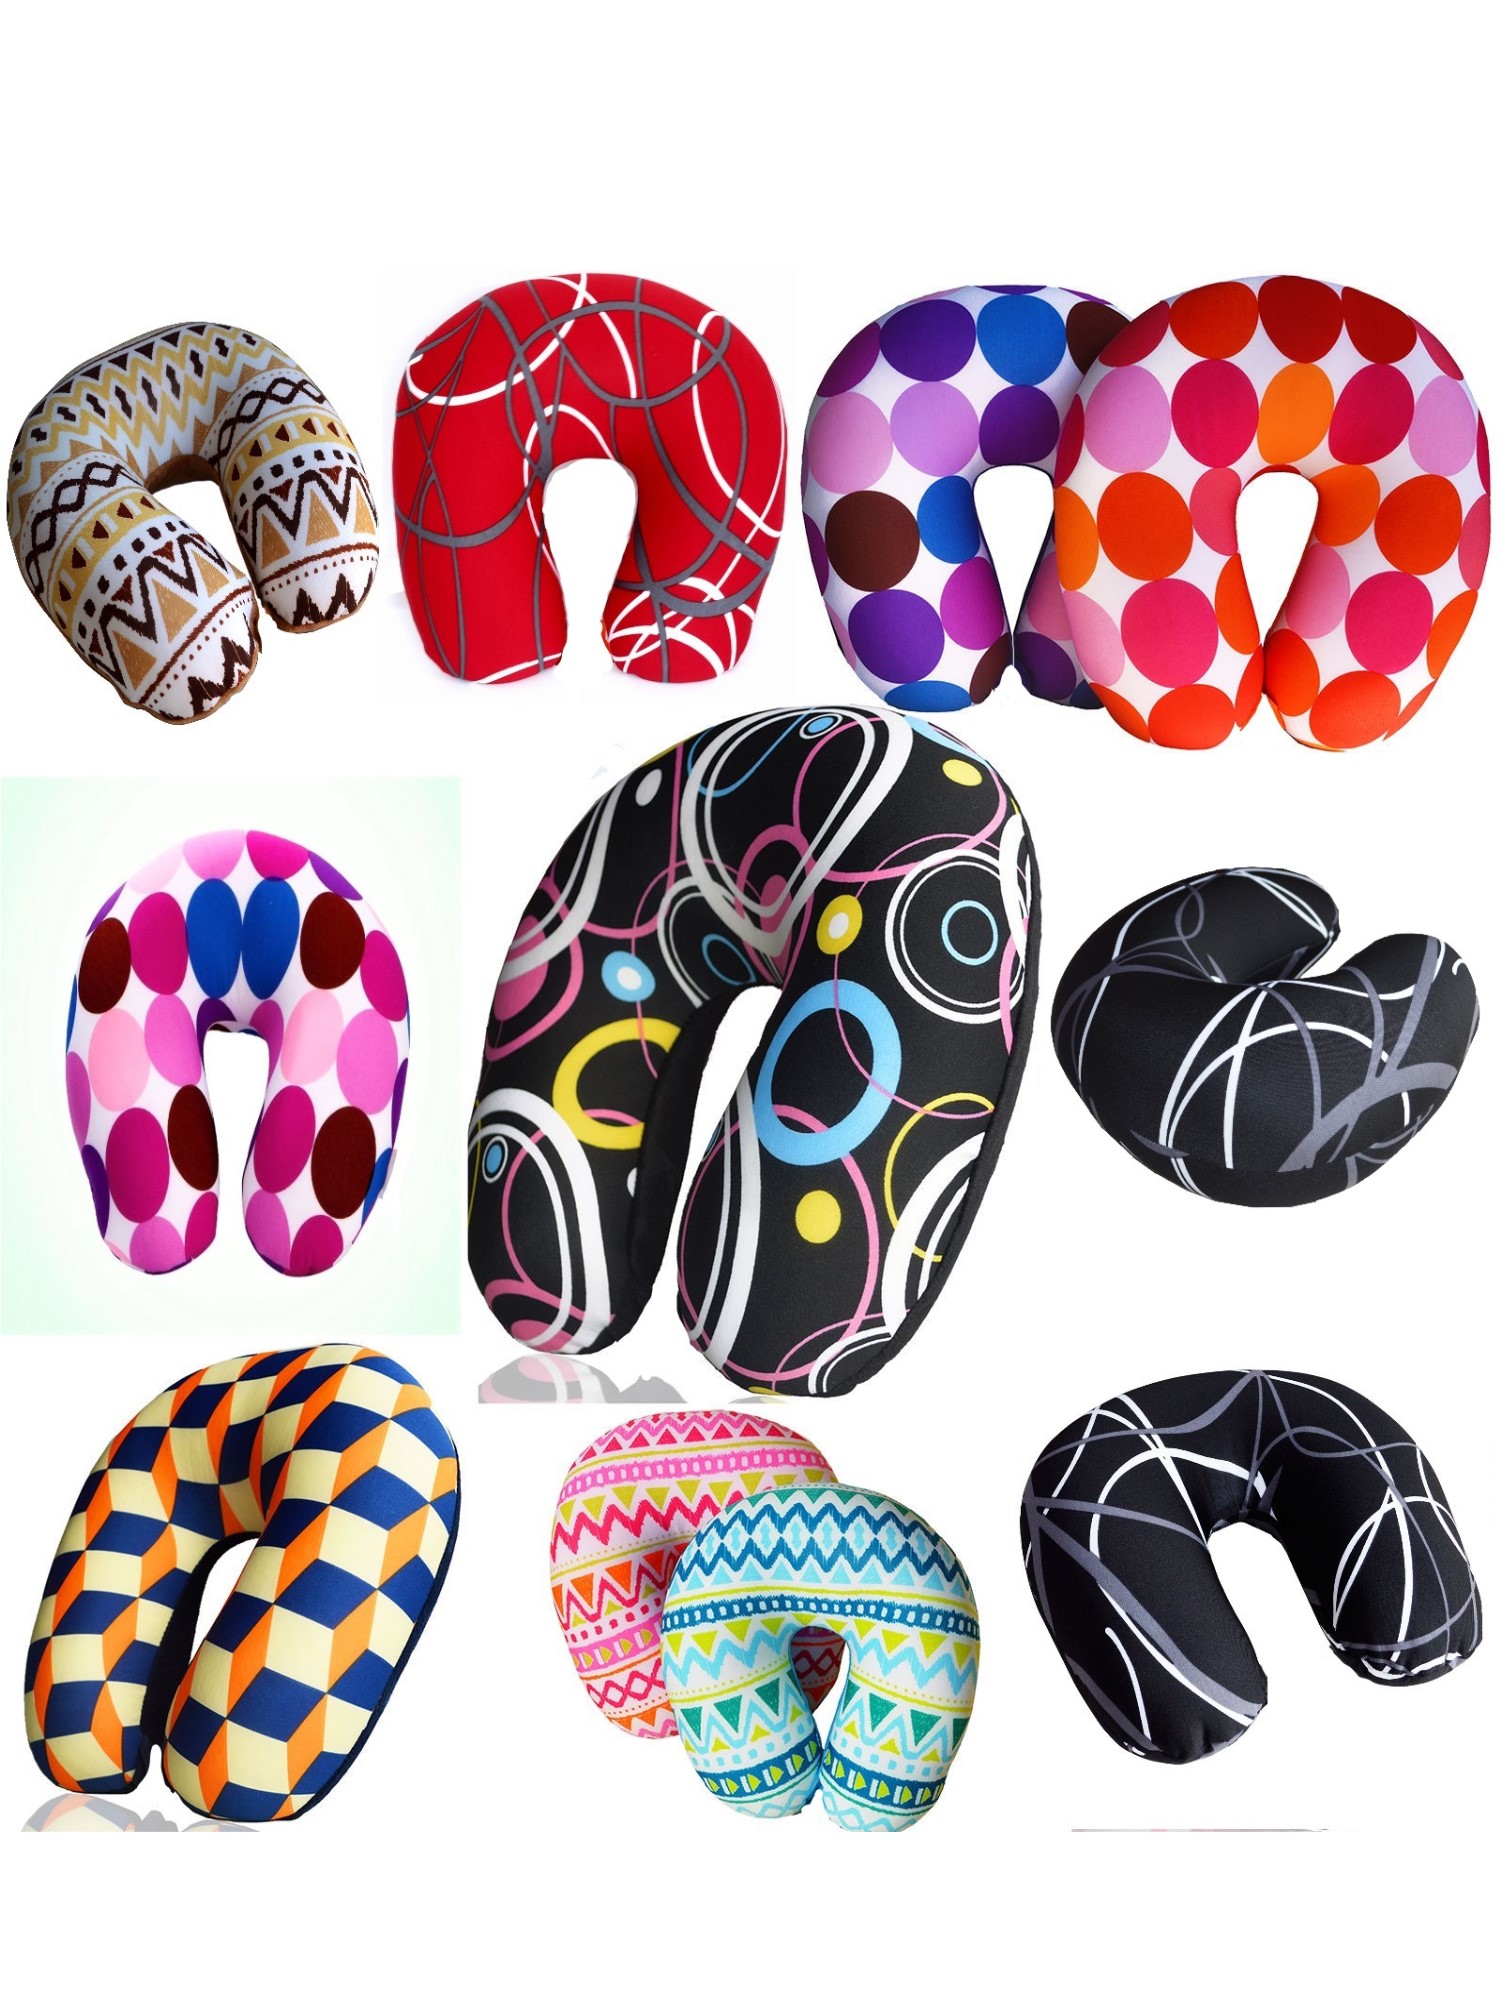 Bookishbunny Ultralight Micro Beads U Shaped Neck Pillow Travel Head Cervical Support Cushion - image 6 of 6